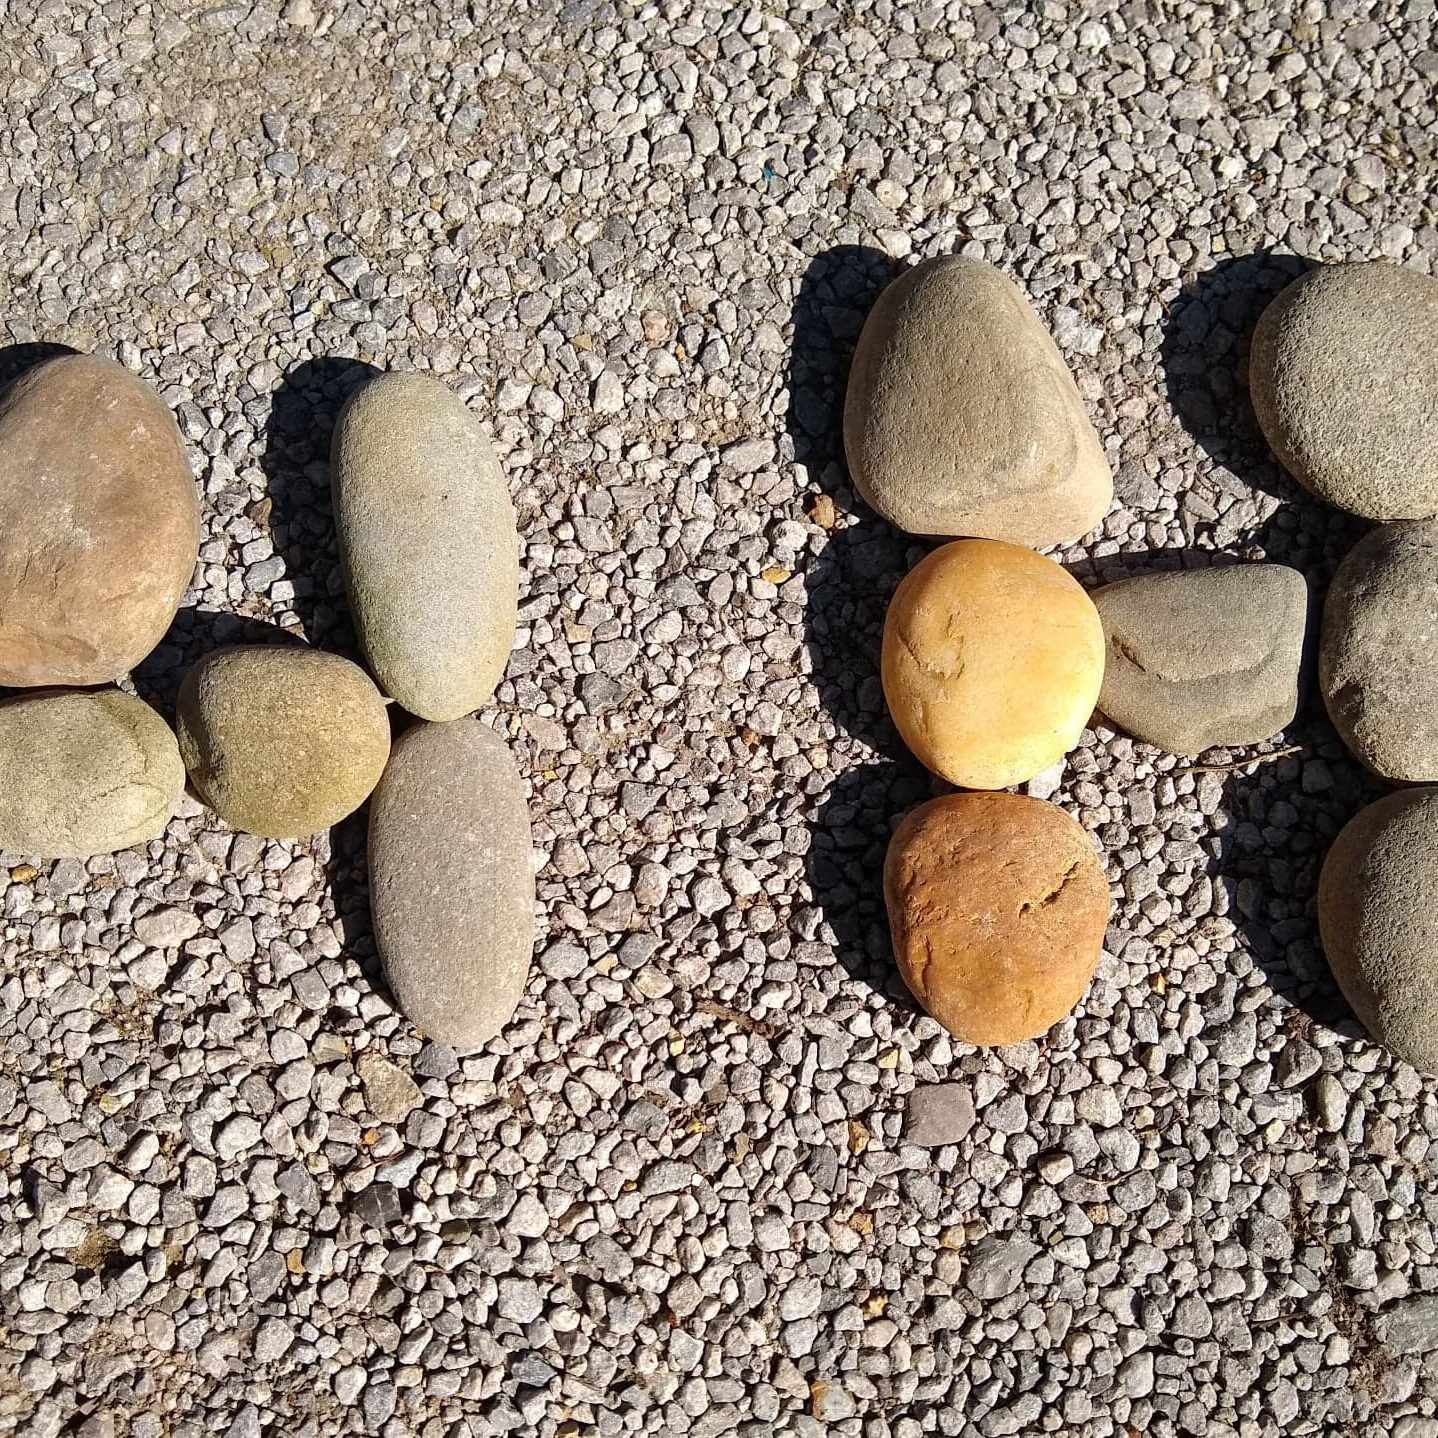 pebble stones spelling out 4-H 